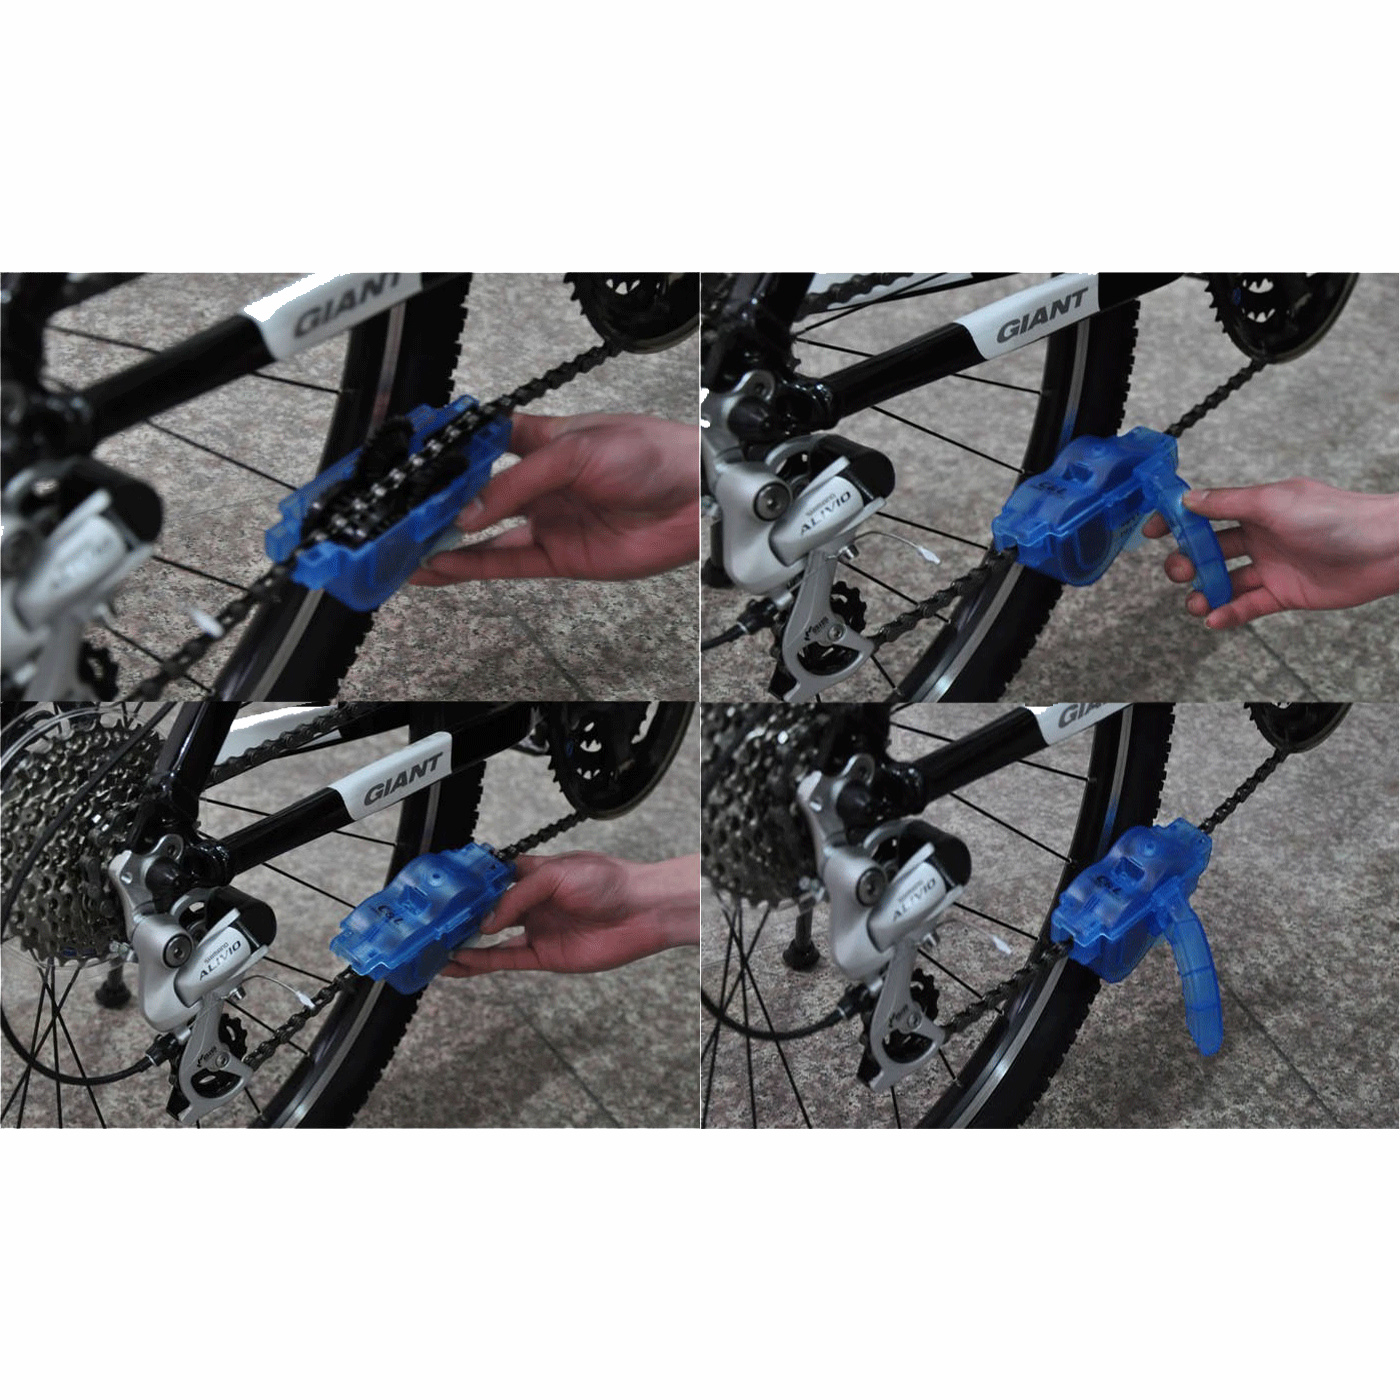 Portable Bicycle chain washer Bike Brushes Scrubber Wash Tool Mountain Cycling Cleaning Kit Outdoor Accessory riding equipment